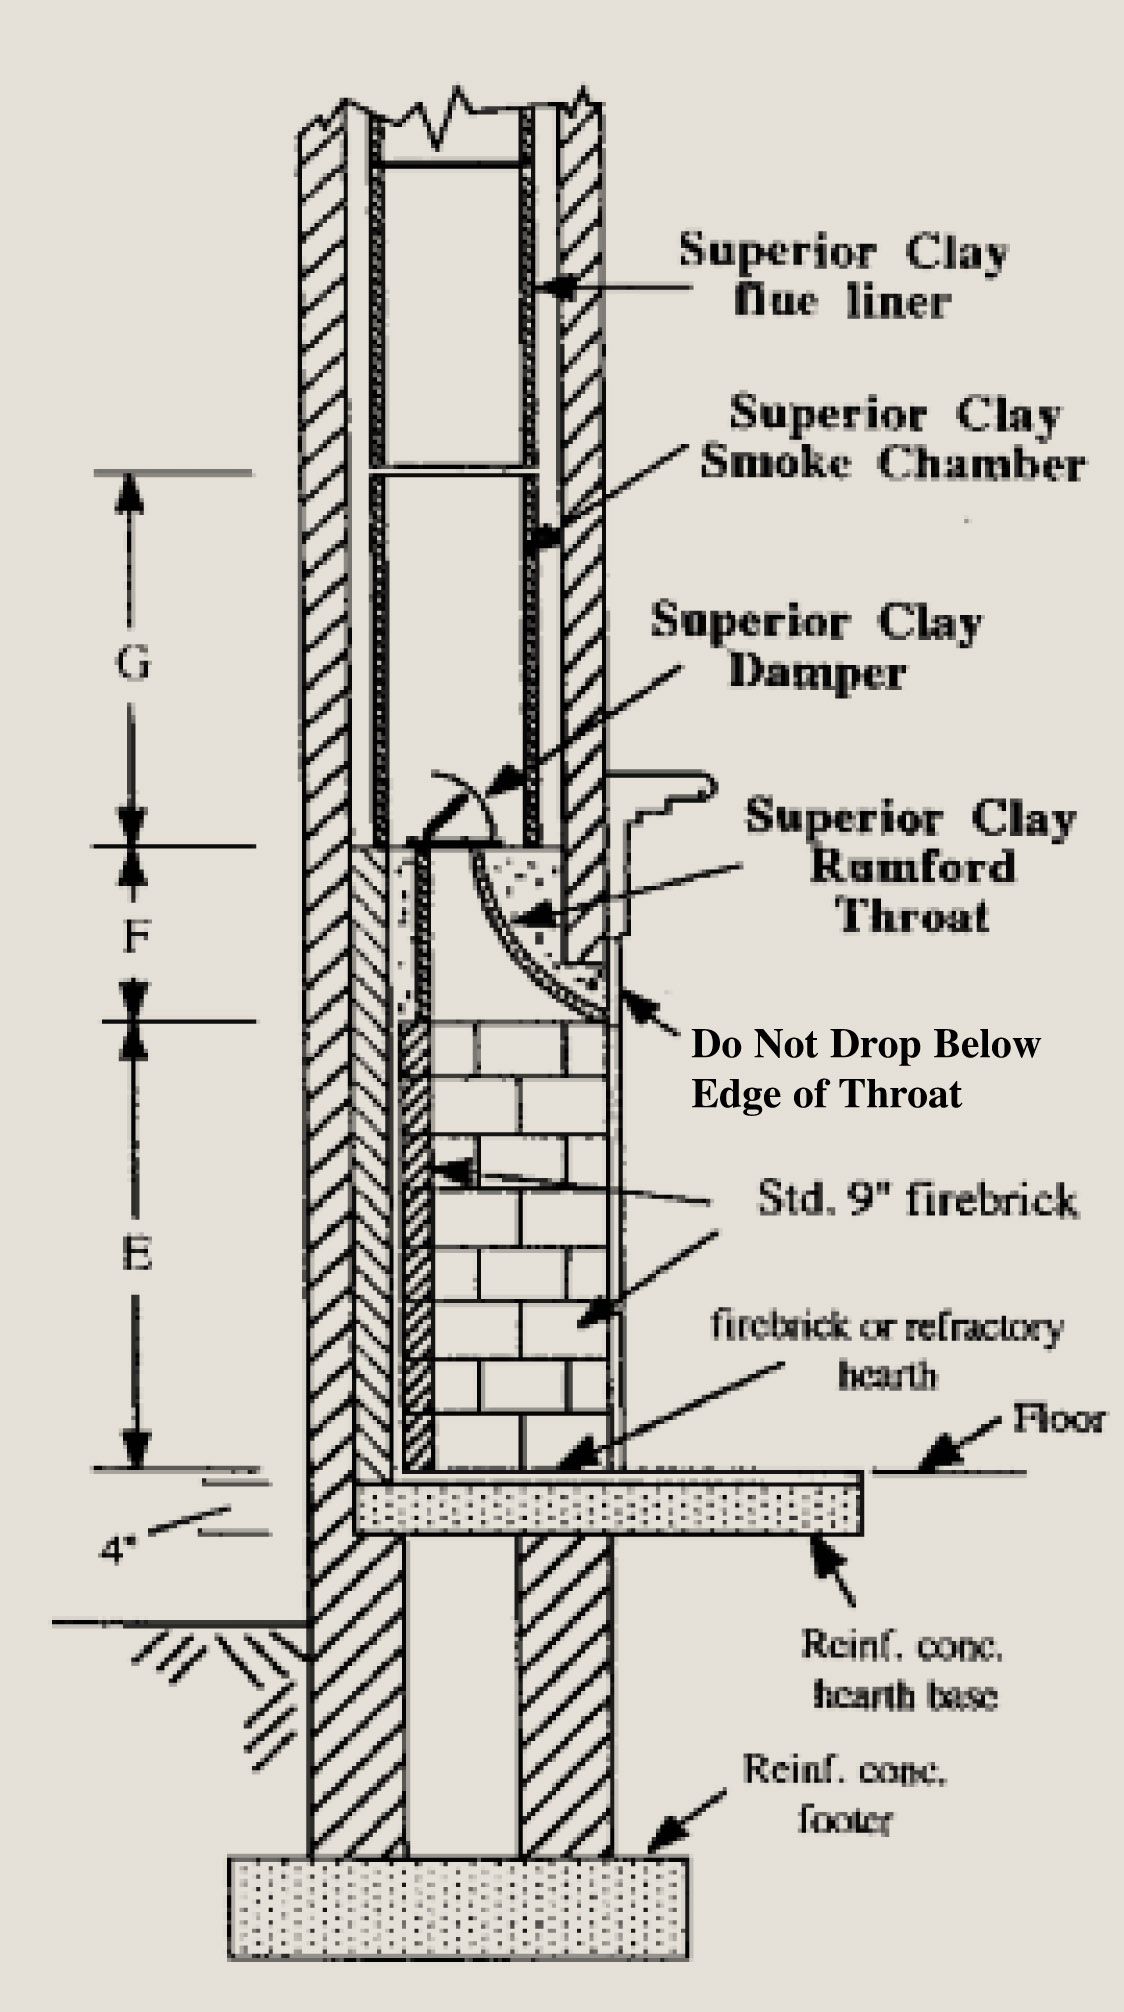 Craigslist Fireplace Inspirational Rumford Plans and Instructions Superior Clay